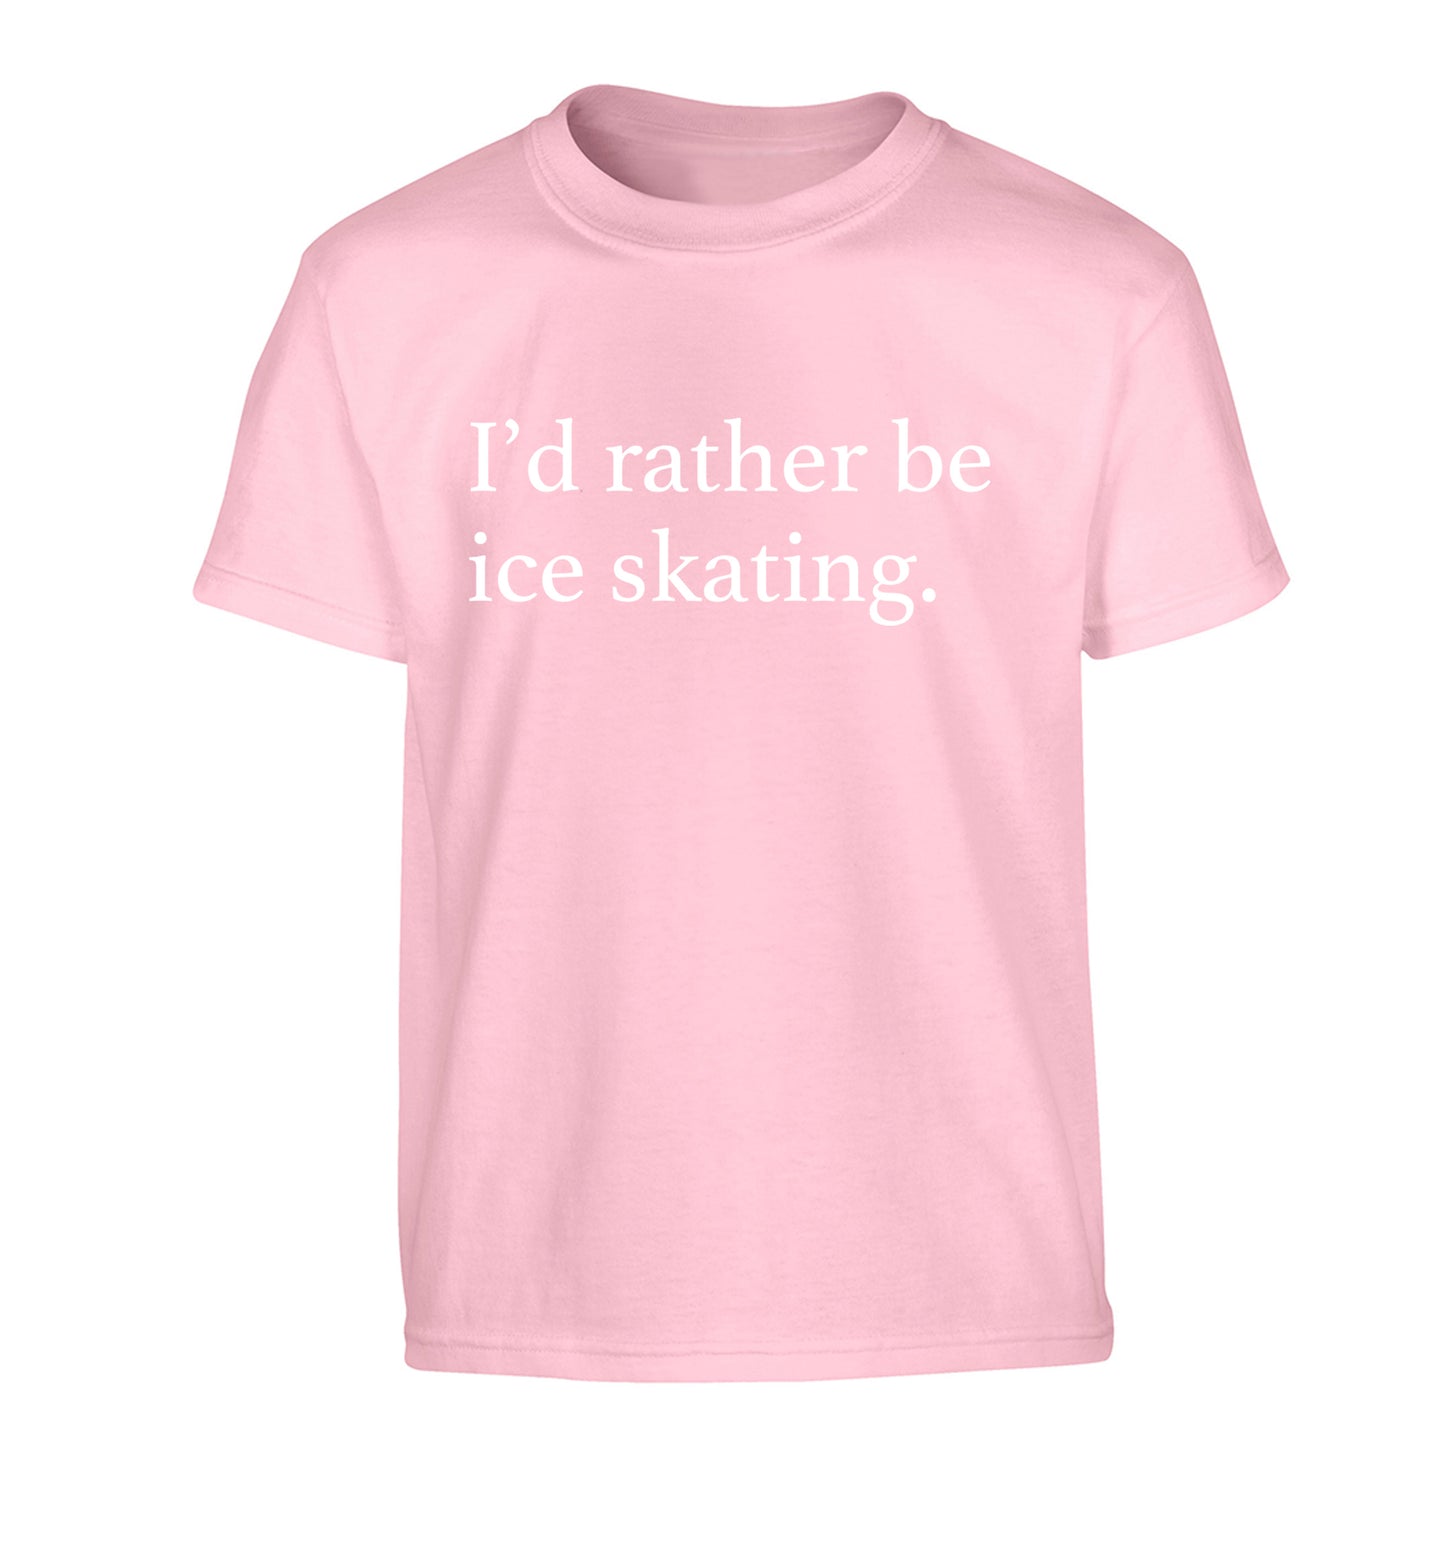 I'd rather be ice skating Children's light pink Tshirt 12-14 Years